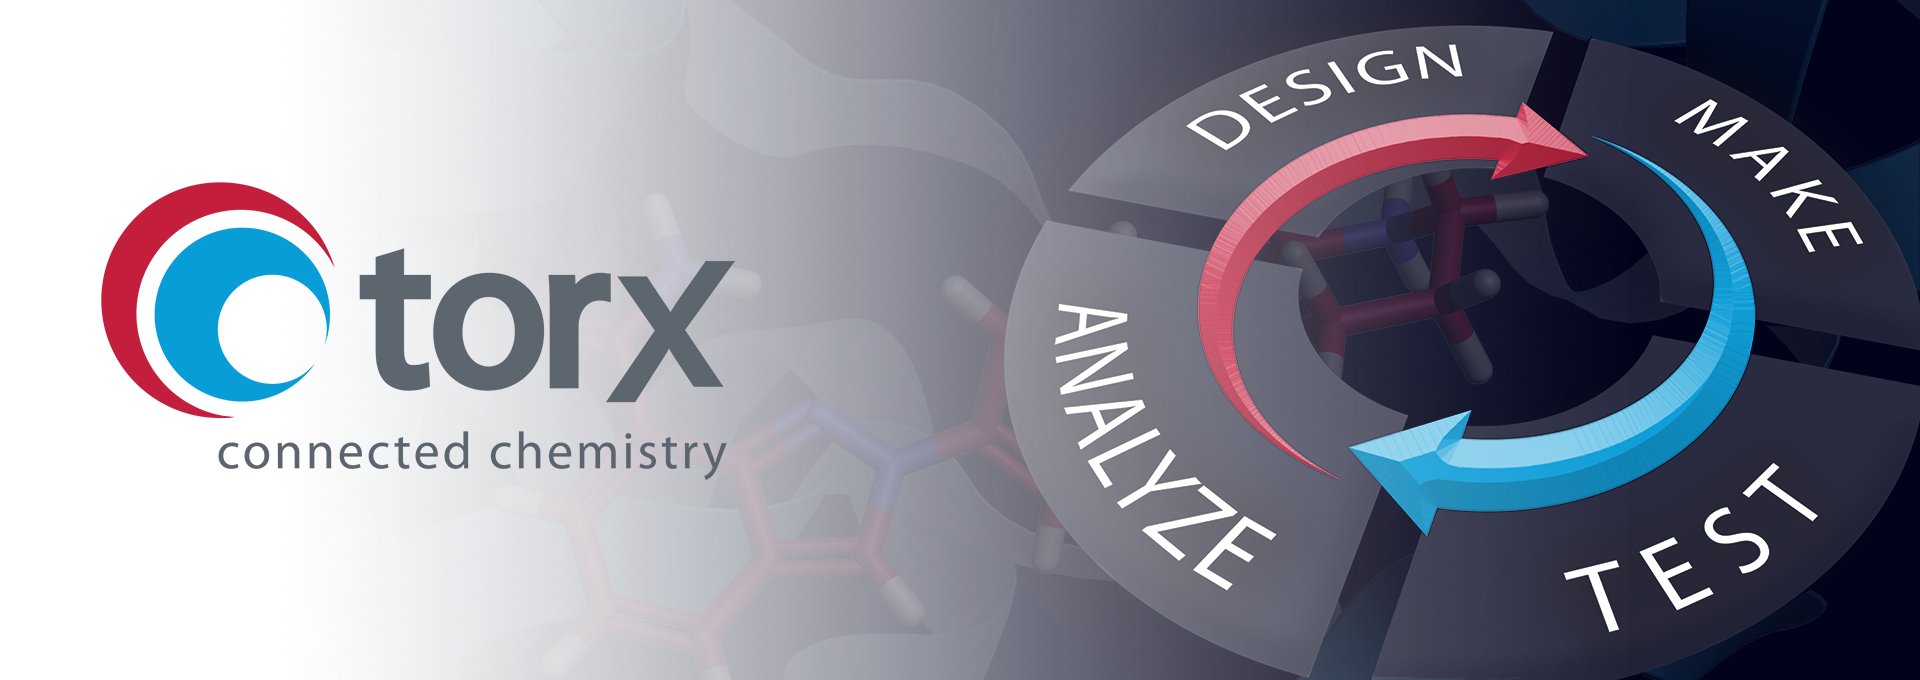 Torx connected chemistry banner image